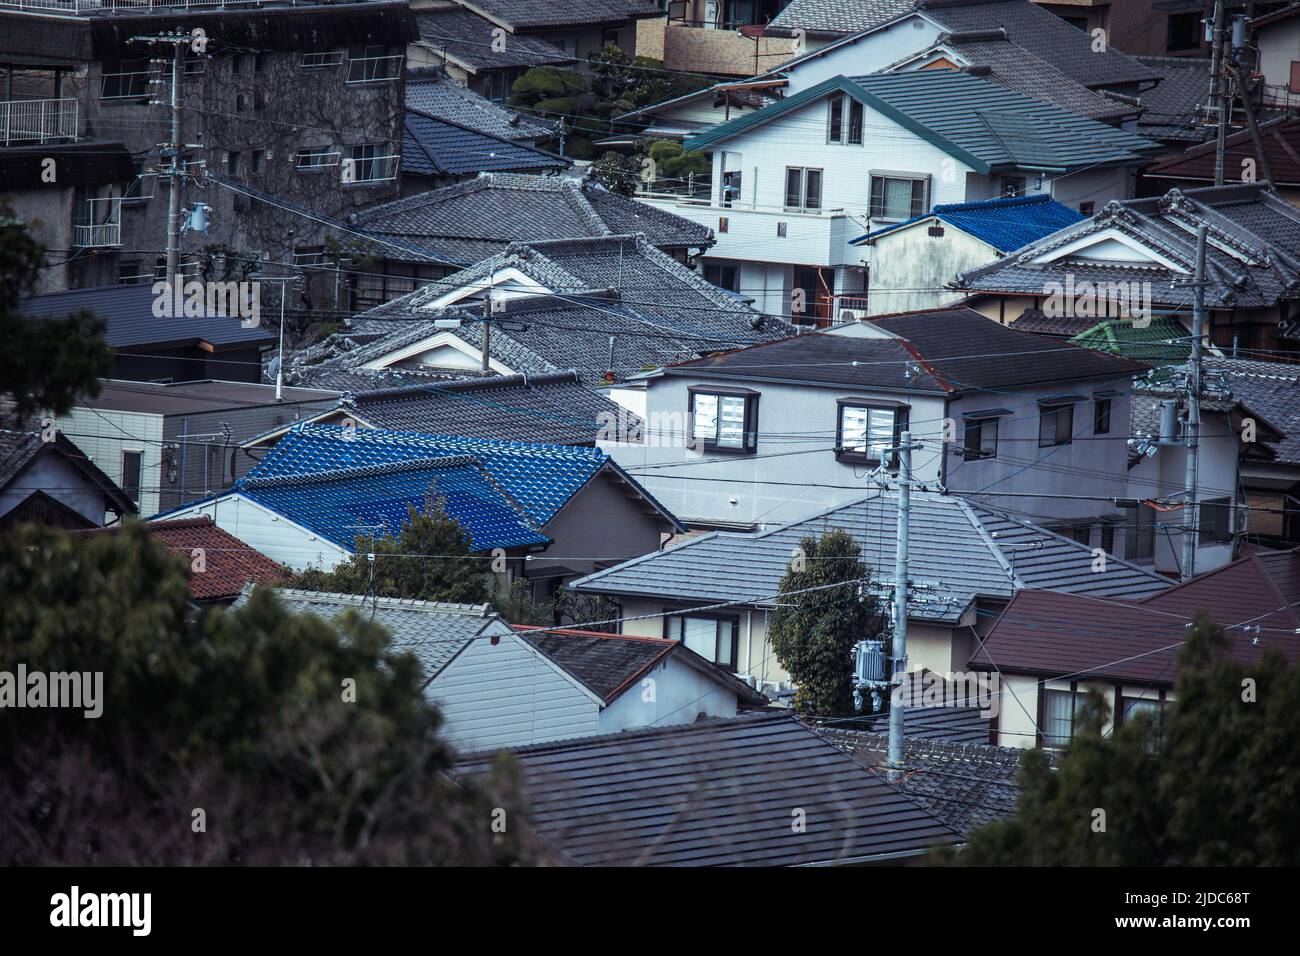 Panoramic View to the Residential Roofs of the Himeji City, Japan Stock Photo